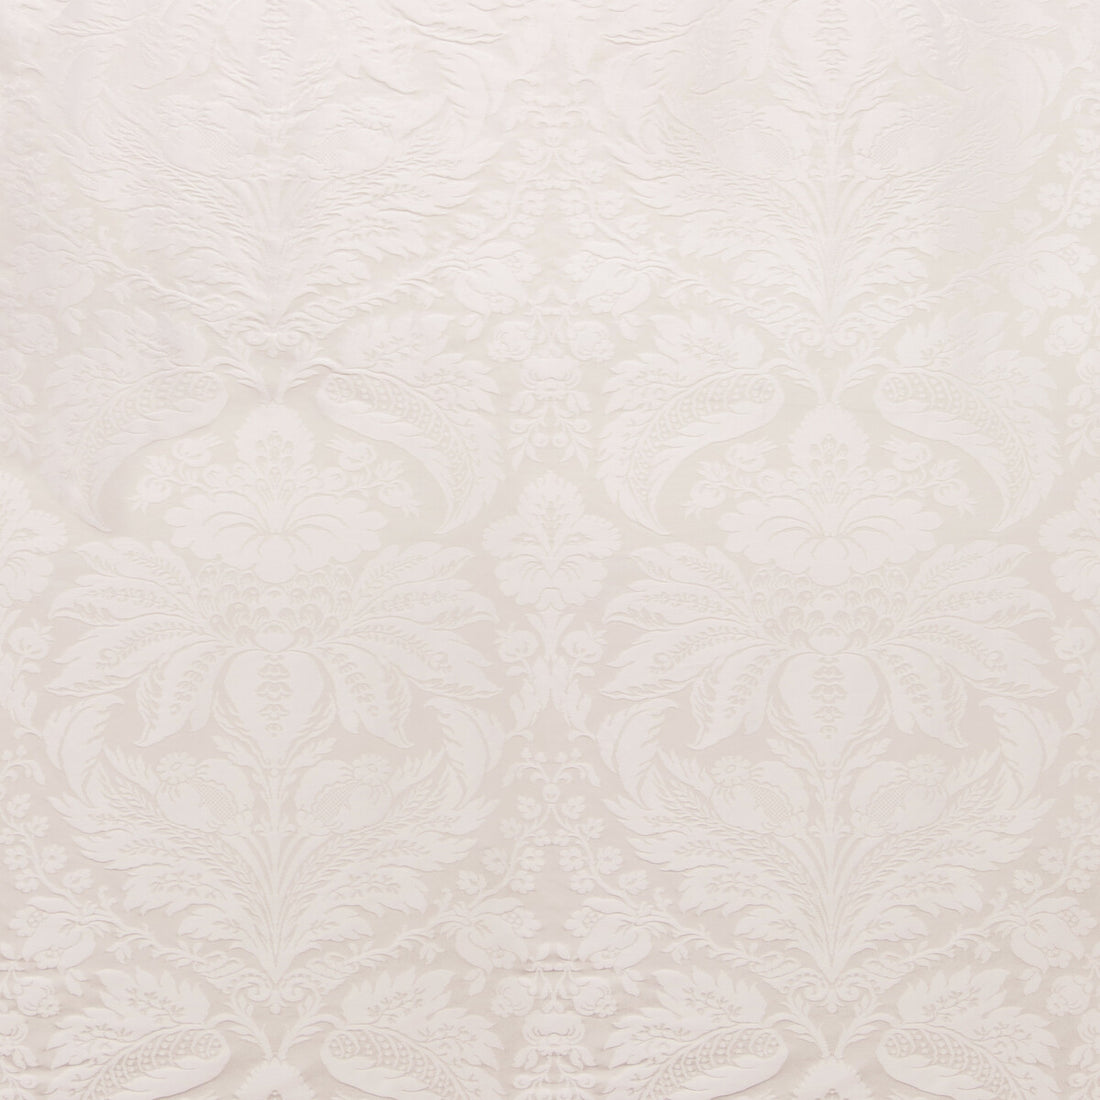 Damask Pierre fabric in snow color - pattern 8013188.1.0 - by Brunschwig &amp; Fils in the B&amp;F Showroom Exclusive 2019 collection